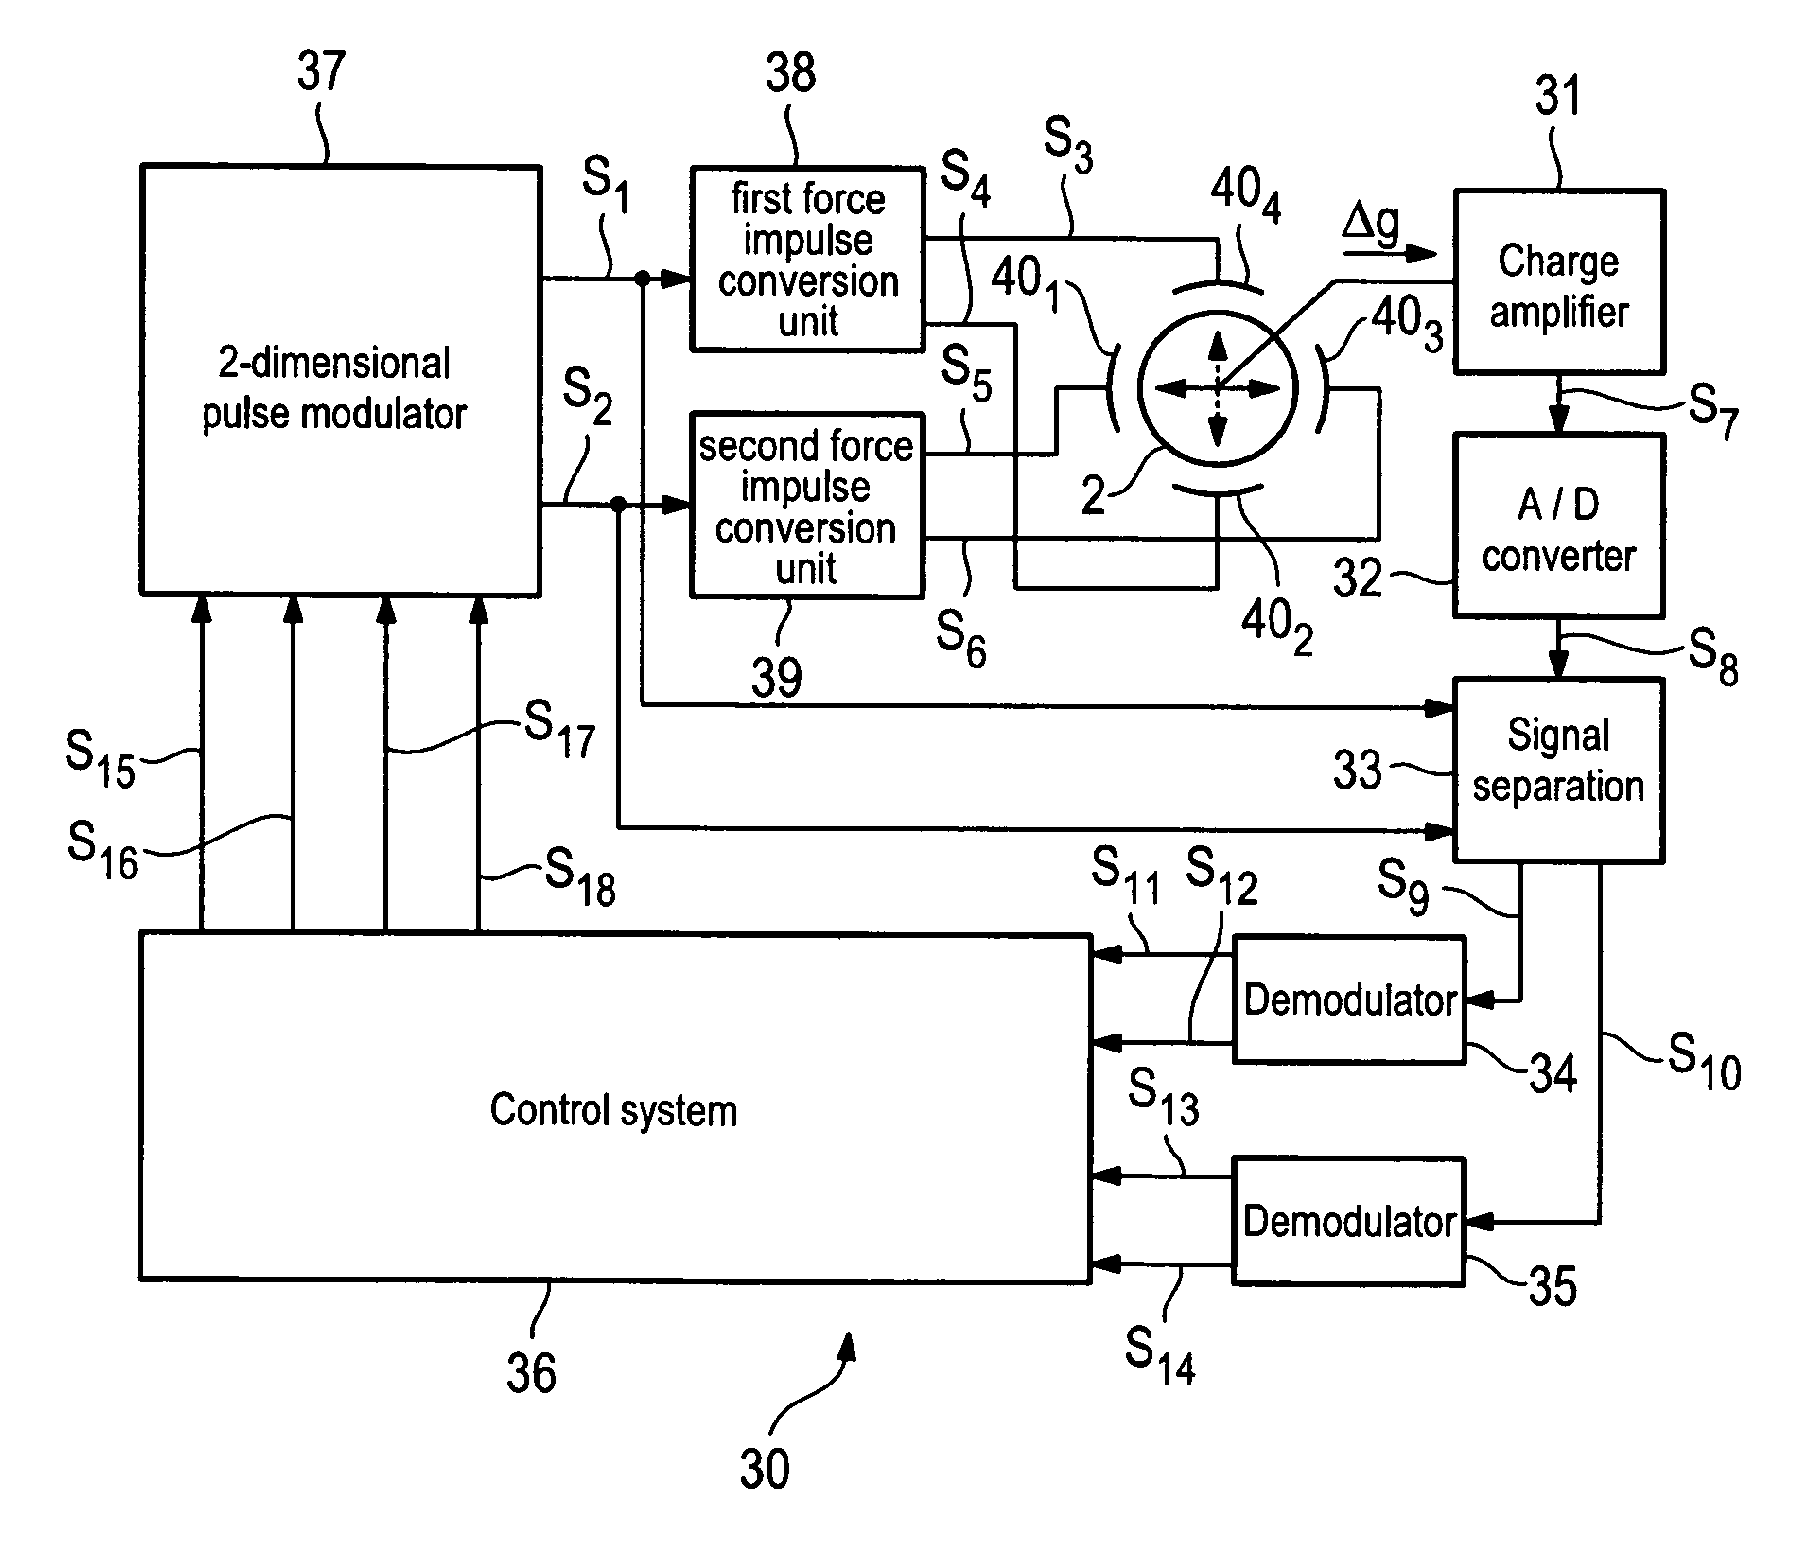 Operating method for a Coriolis gyro, and evaluation/control electronics which are suitable for this purpose